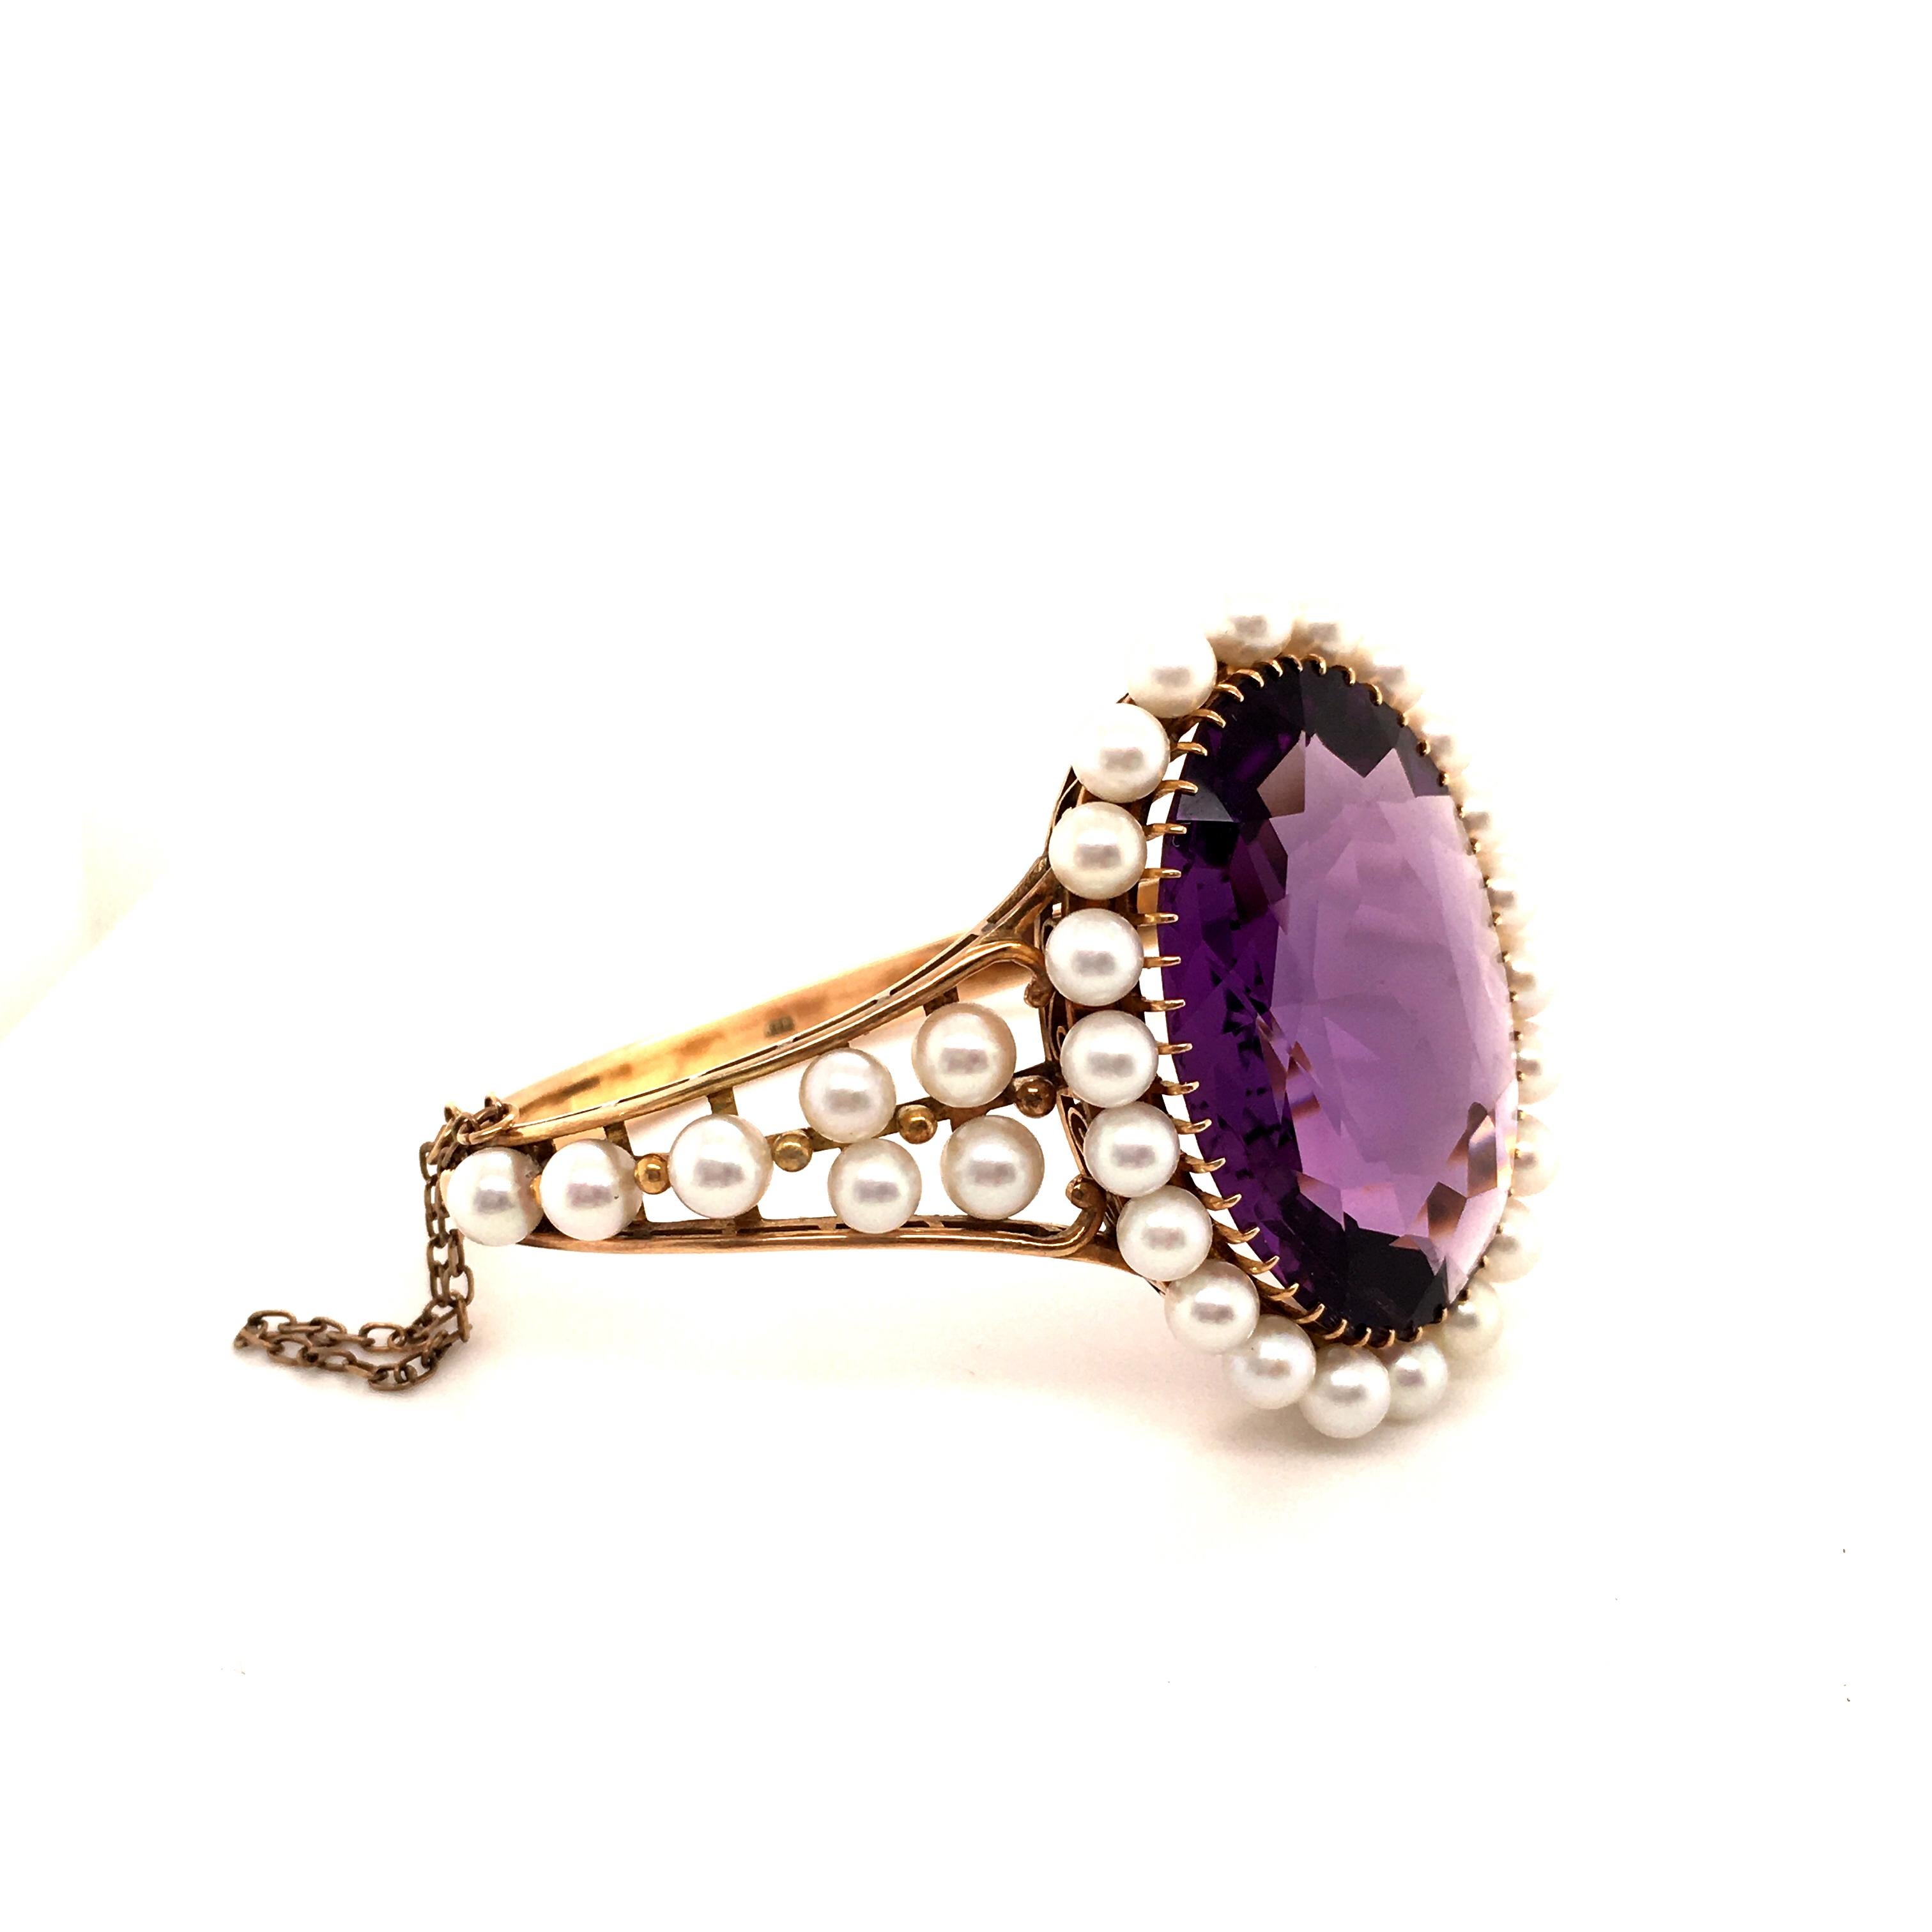 Oval Cut Antique Amethyst and Pearl Bangle in 18 Karat Gold